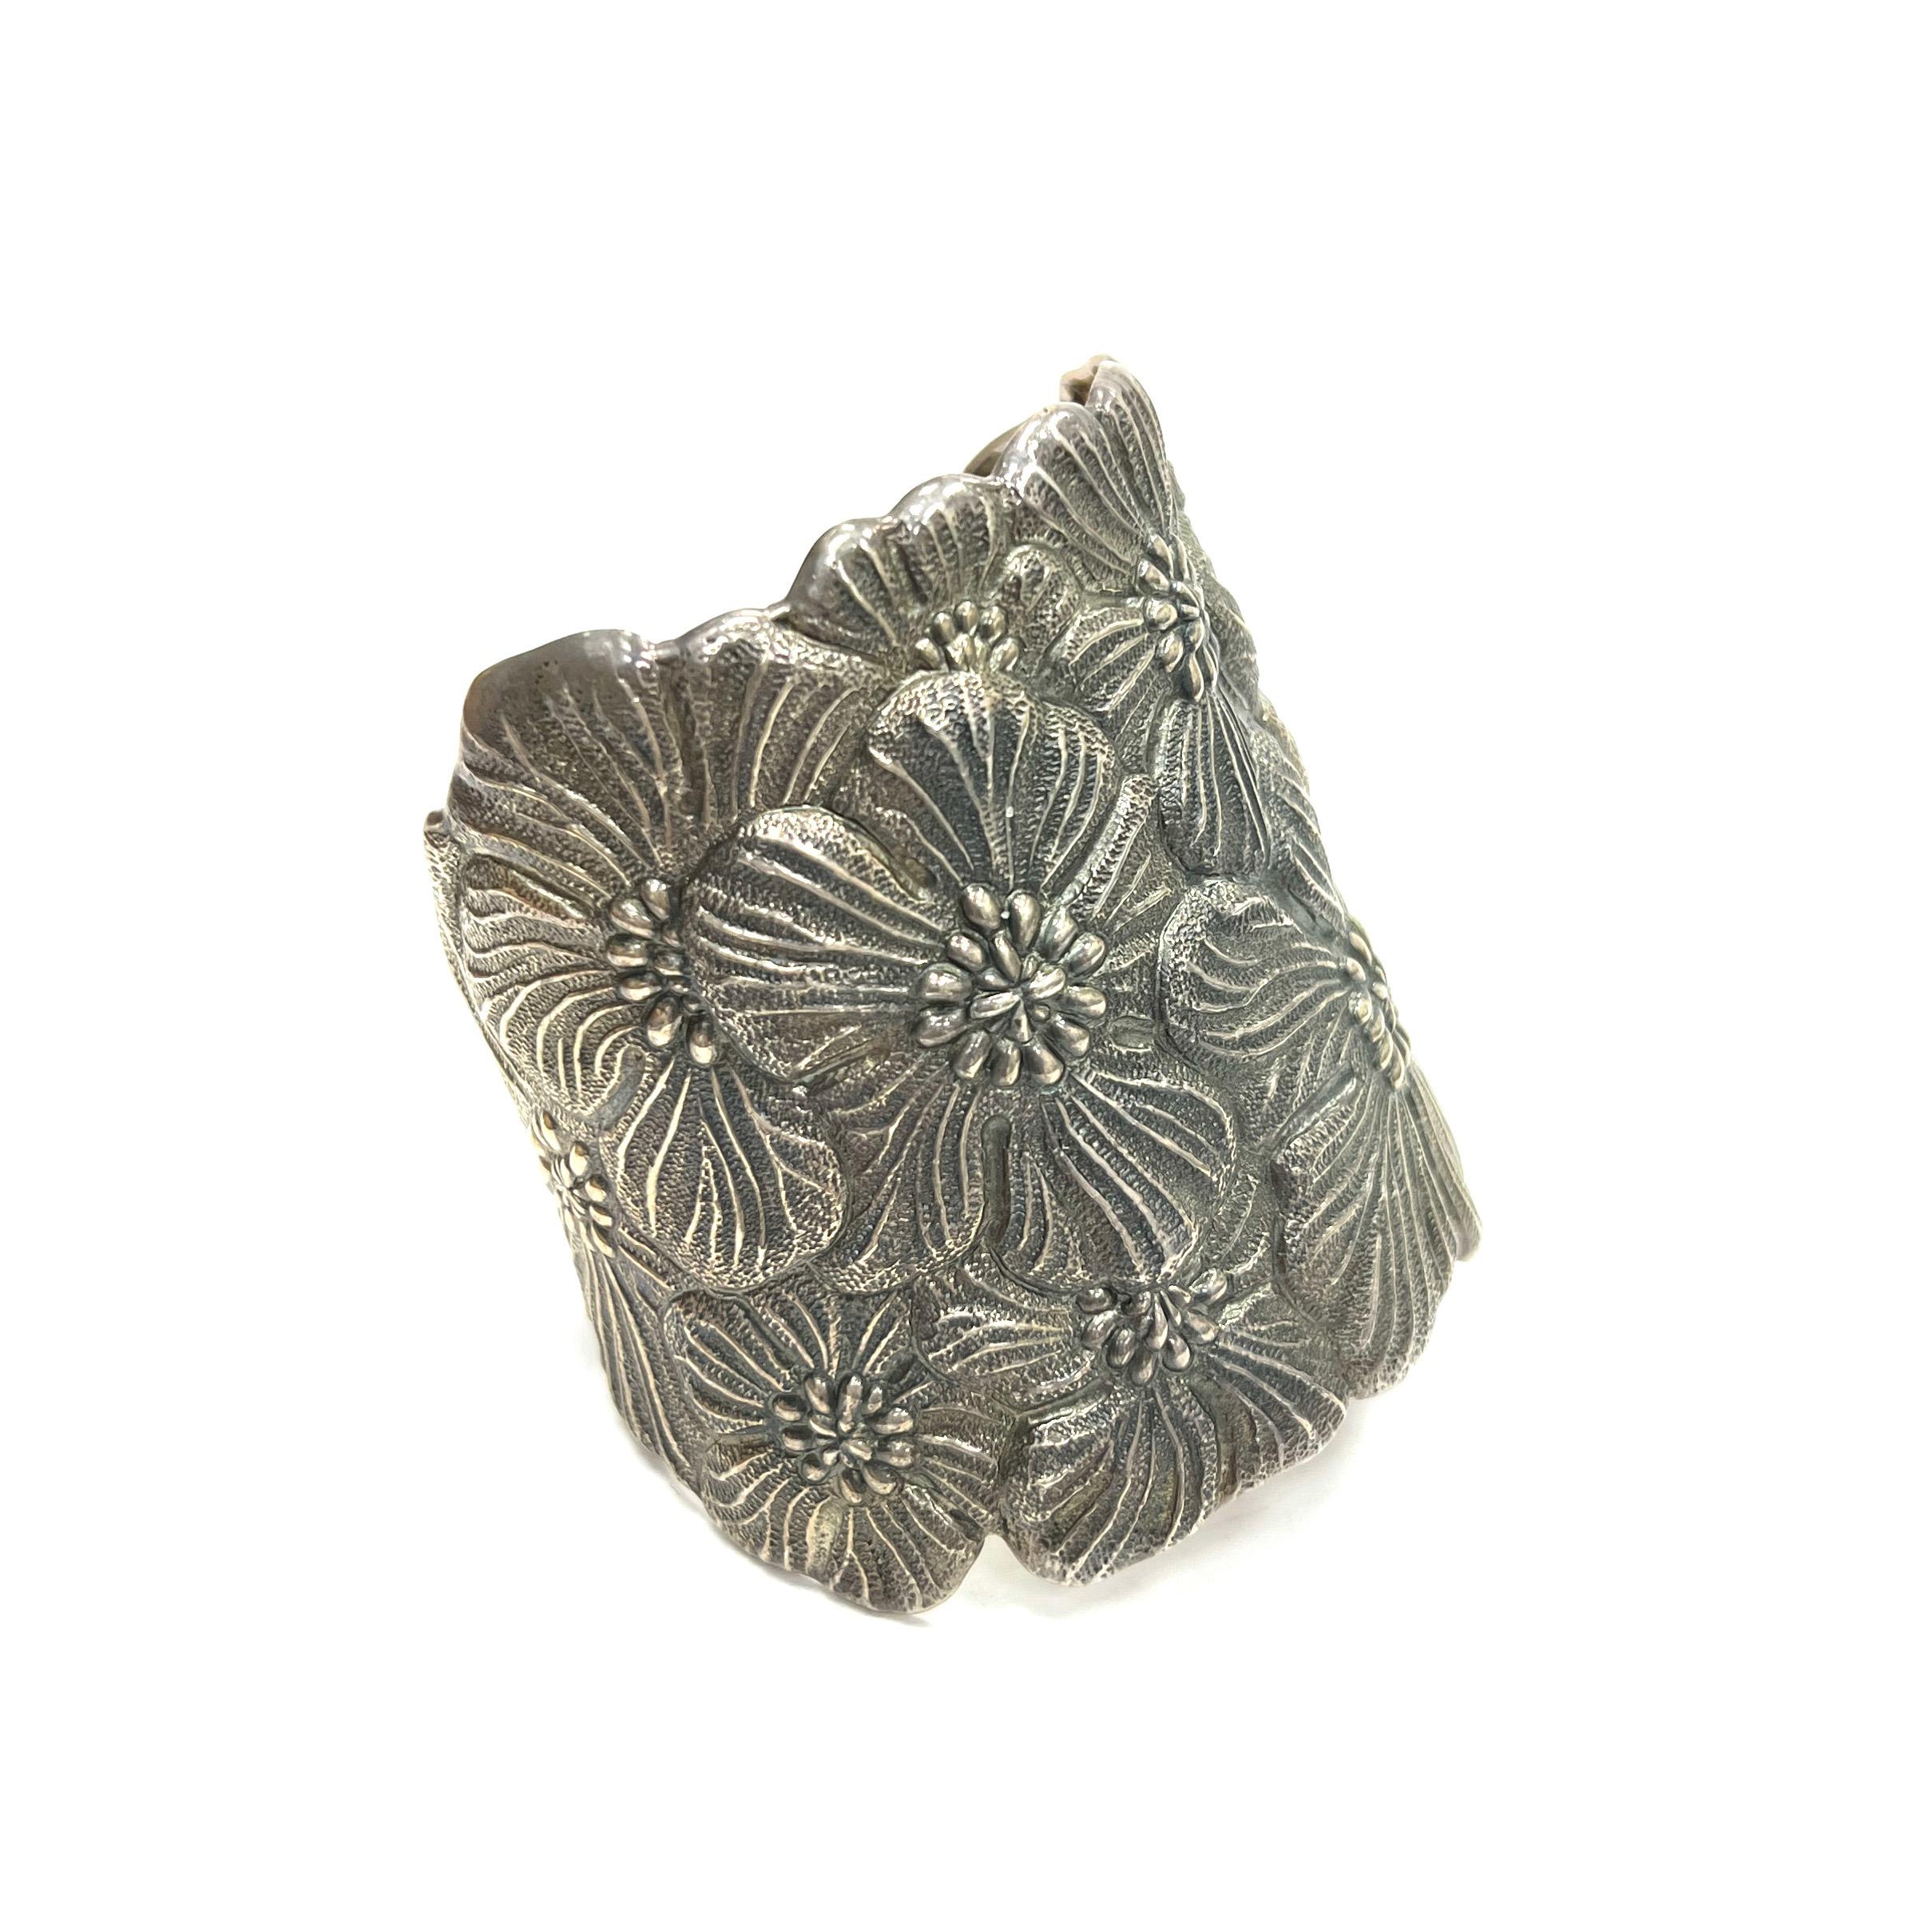 Buccellati Blossoms Wide & Dark Sterling Silver Cuff Bracelet

Blossom flowers design made out of dark sterling silver; marked Buccellati, Italy, 925, Sterling

Size: width 2.63 inches; inner circumference 6.5 inches
Total weight: 99.9 grams